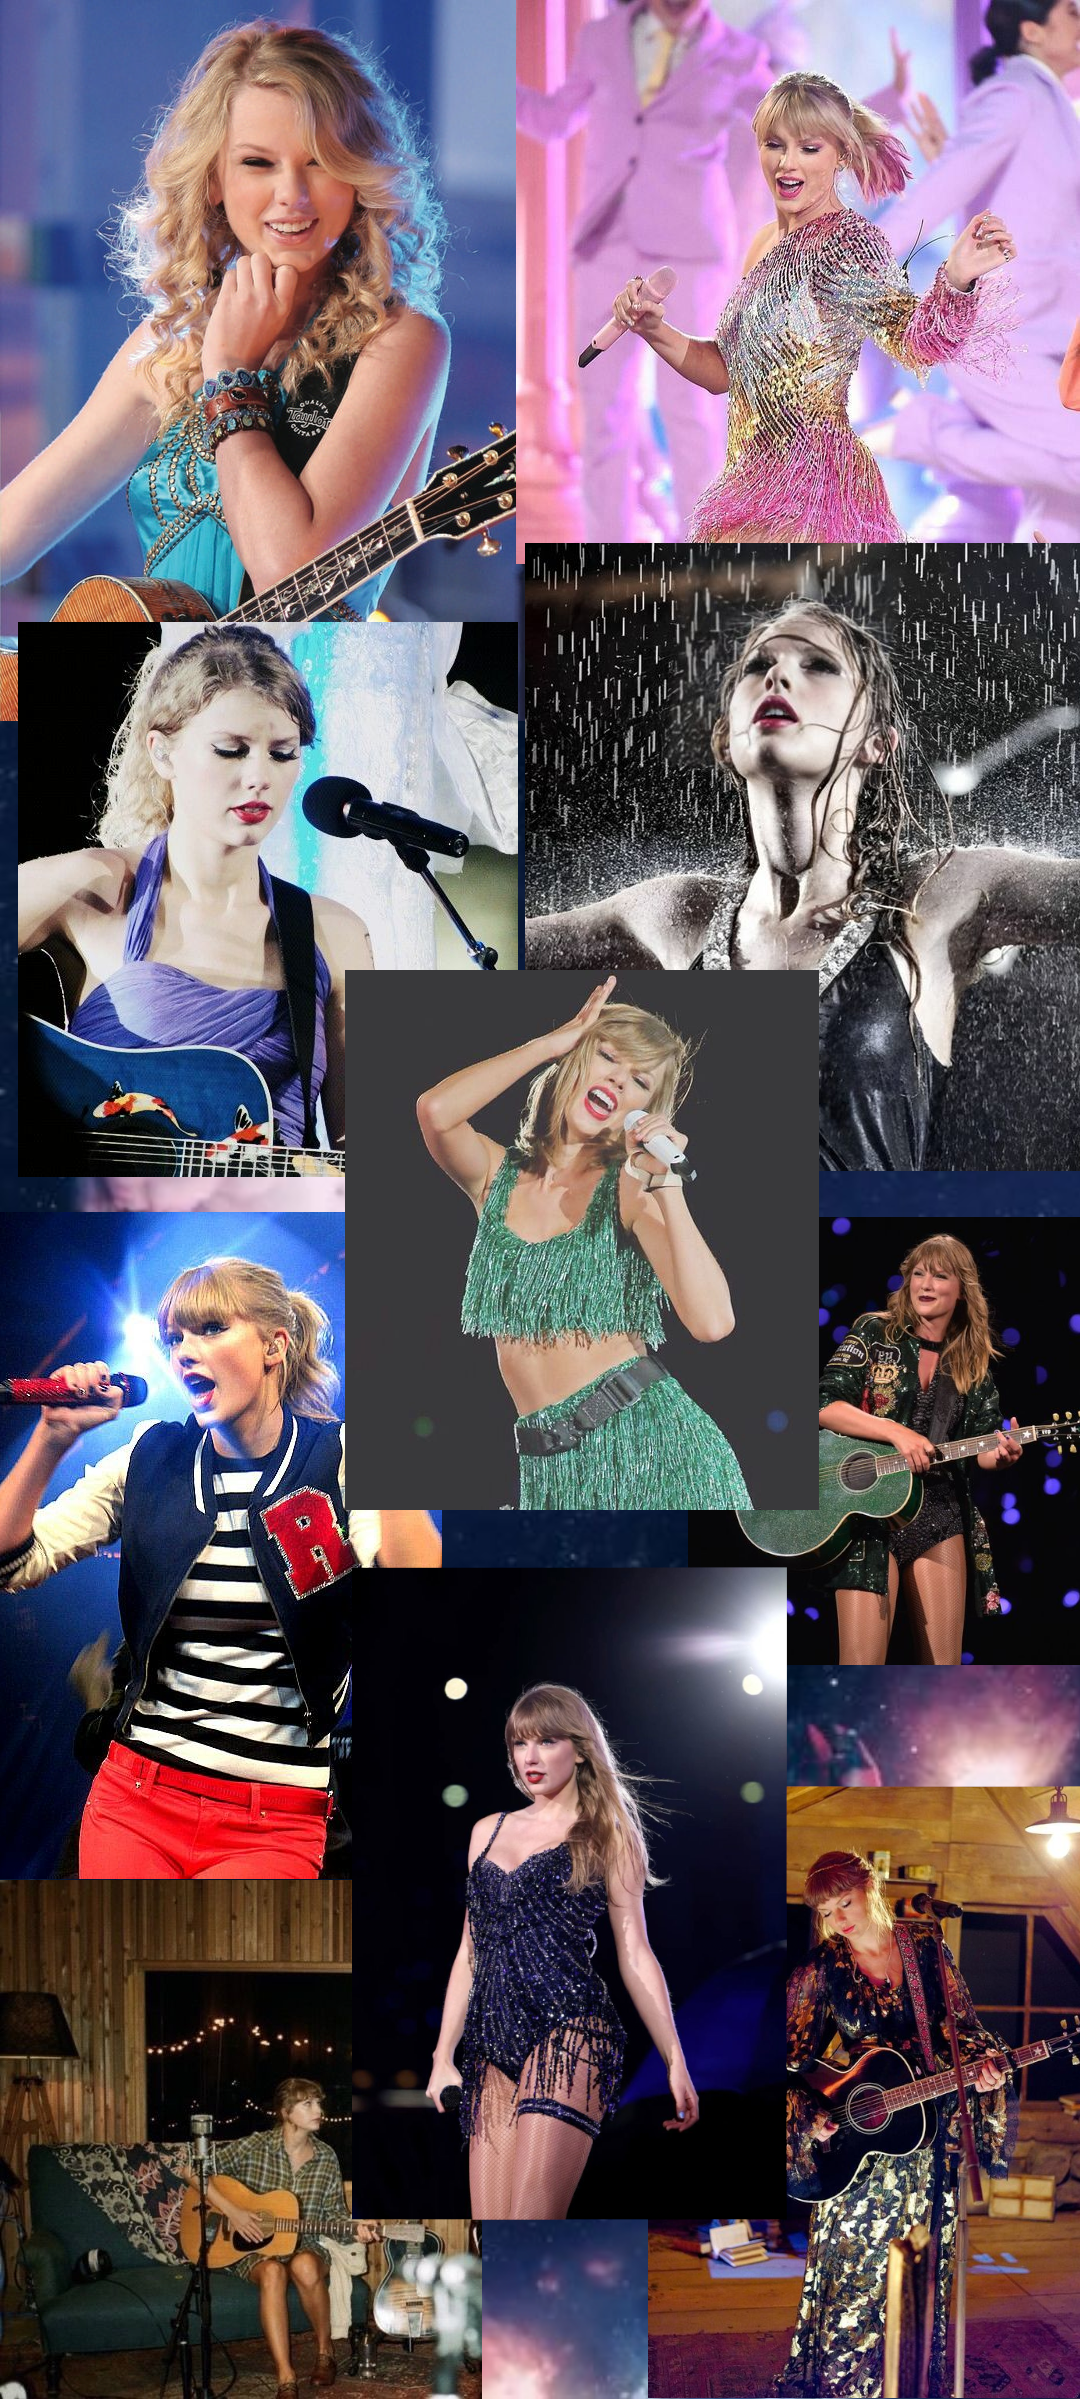 I Designed A Taylor Swift Wallpaper Based On My Favorite Looks